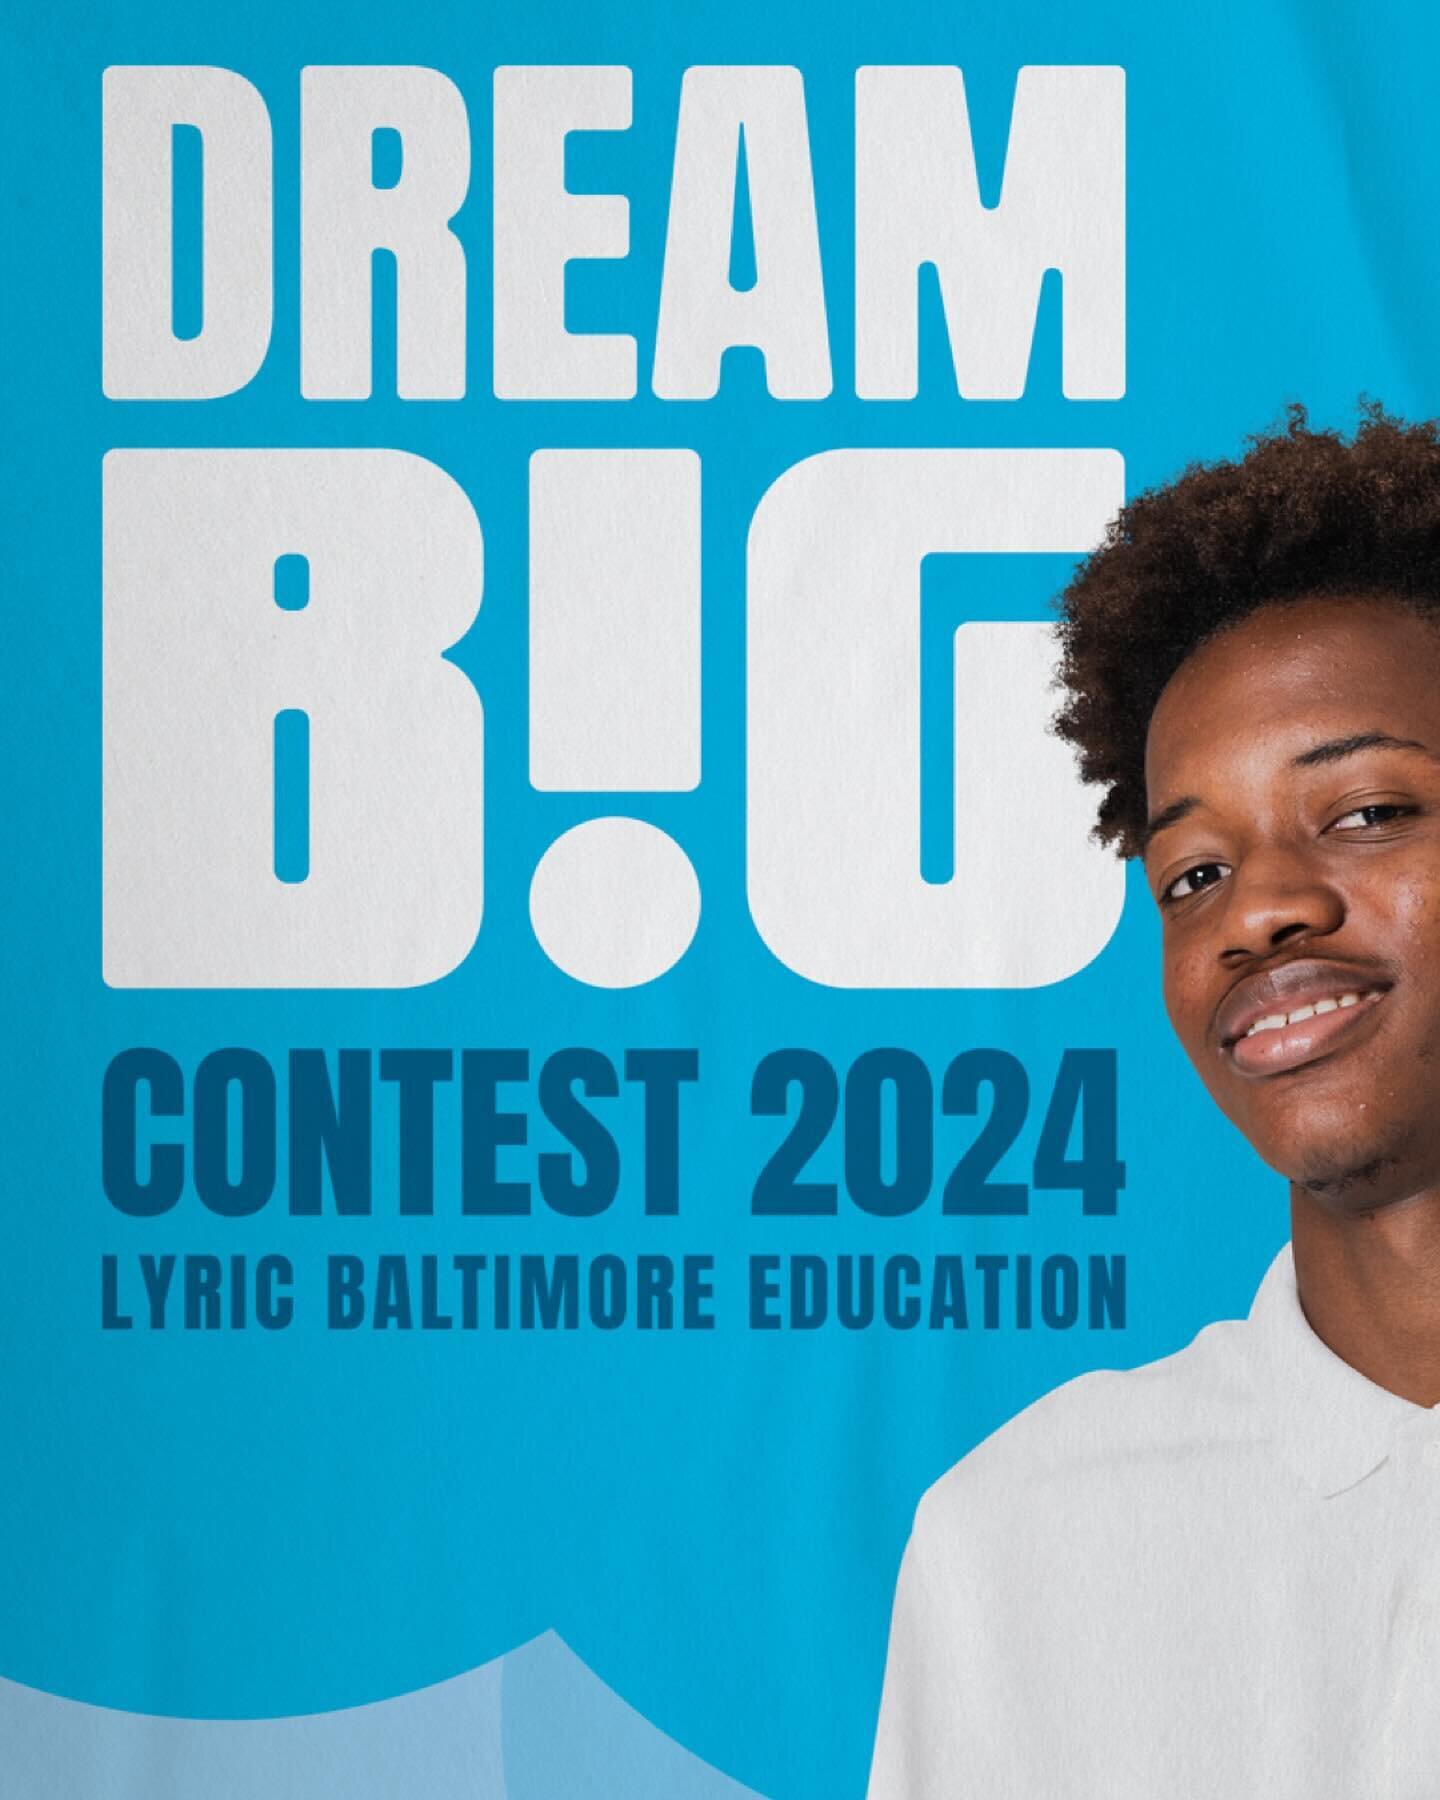 Next up: brand identity design for Lyric Baltimore&rsquo;s annual Dream Big contest.

Inspired by the incredible vision of Dr. Martin Luther King Jr.&mdash;built on principles of justice, equity, and love&mdash;the Lyric asks Baltimore City and Balti